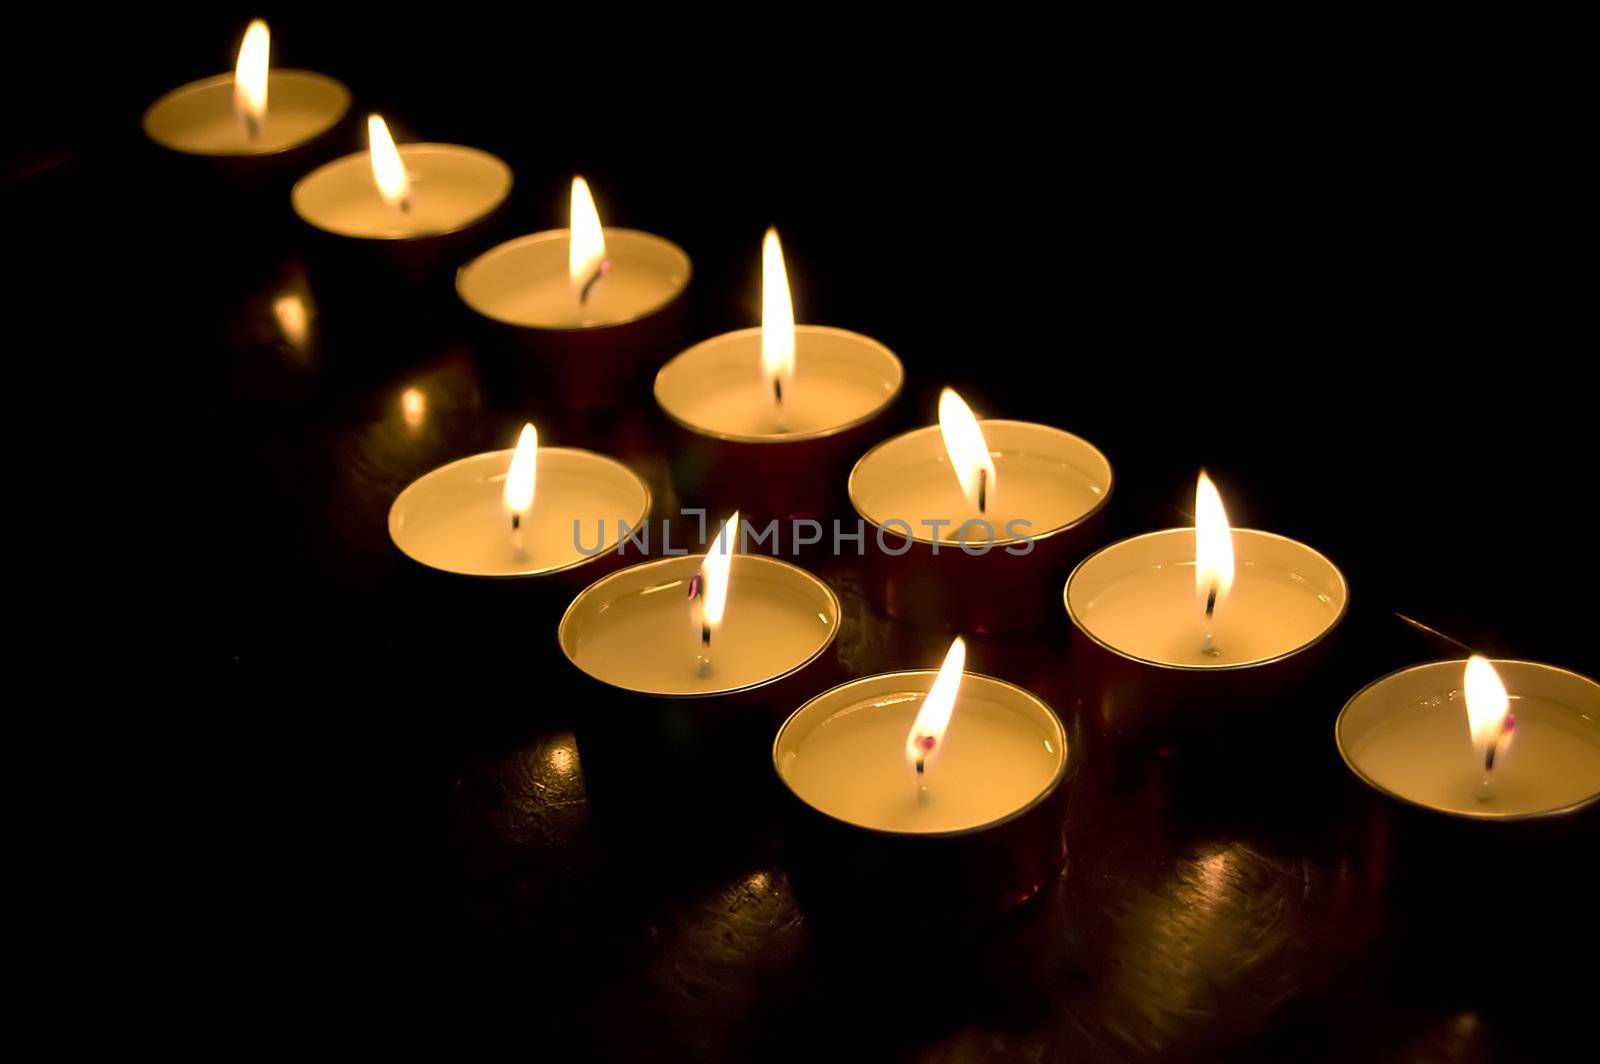 Group of church candles burning in the darkness